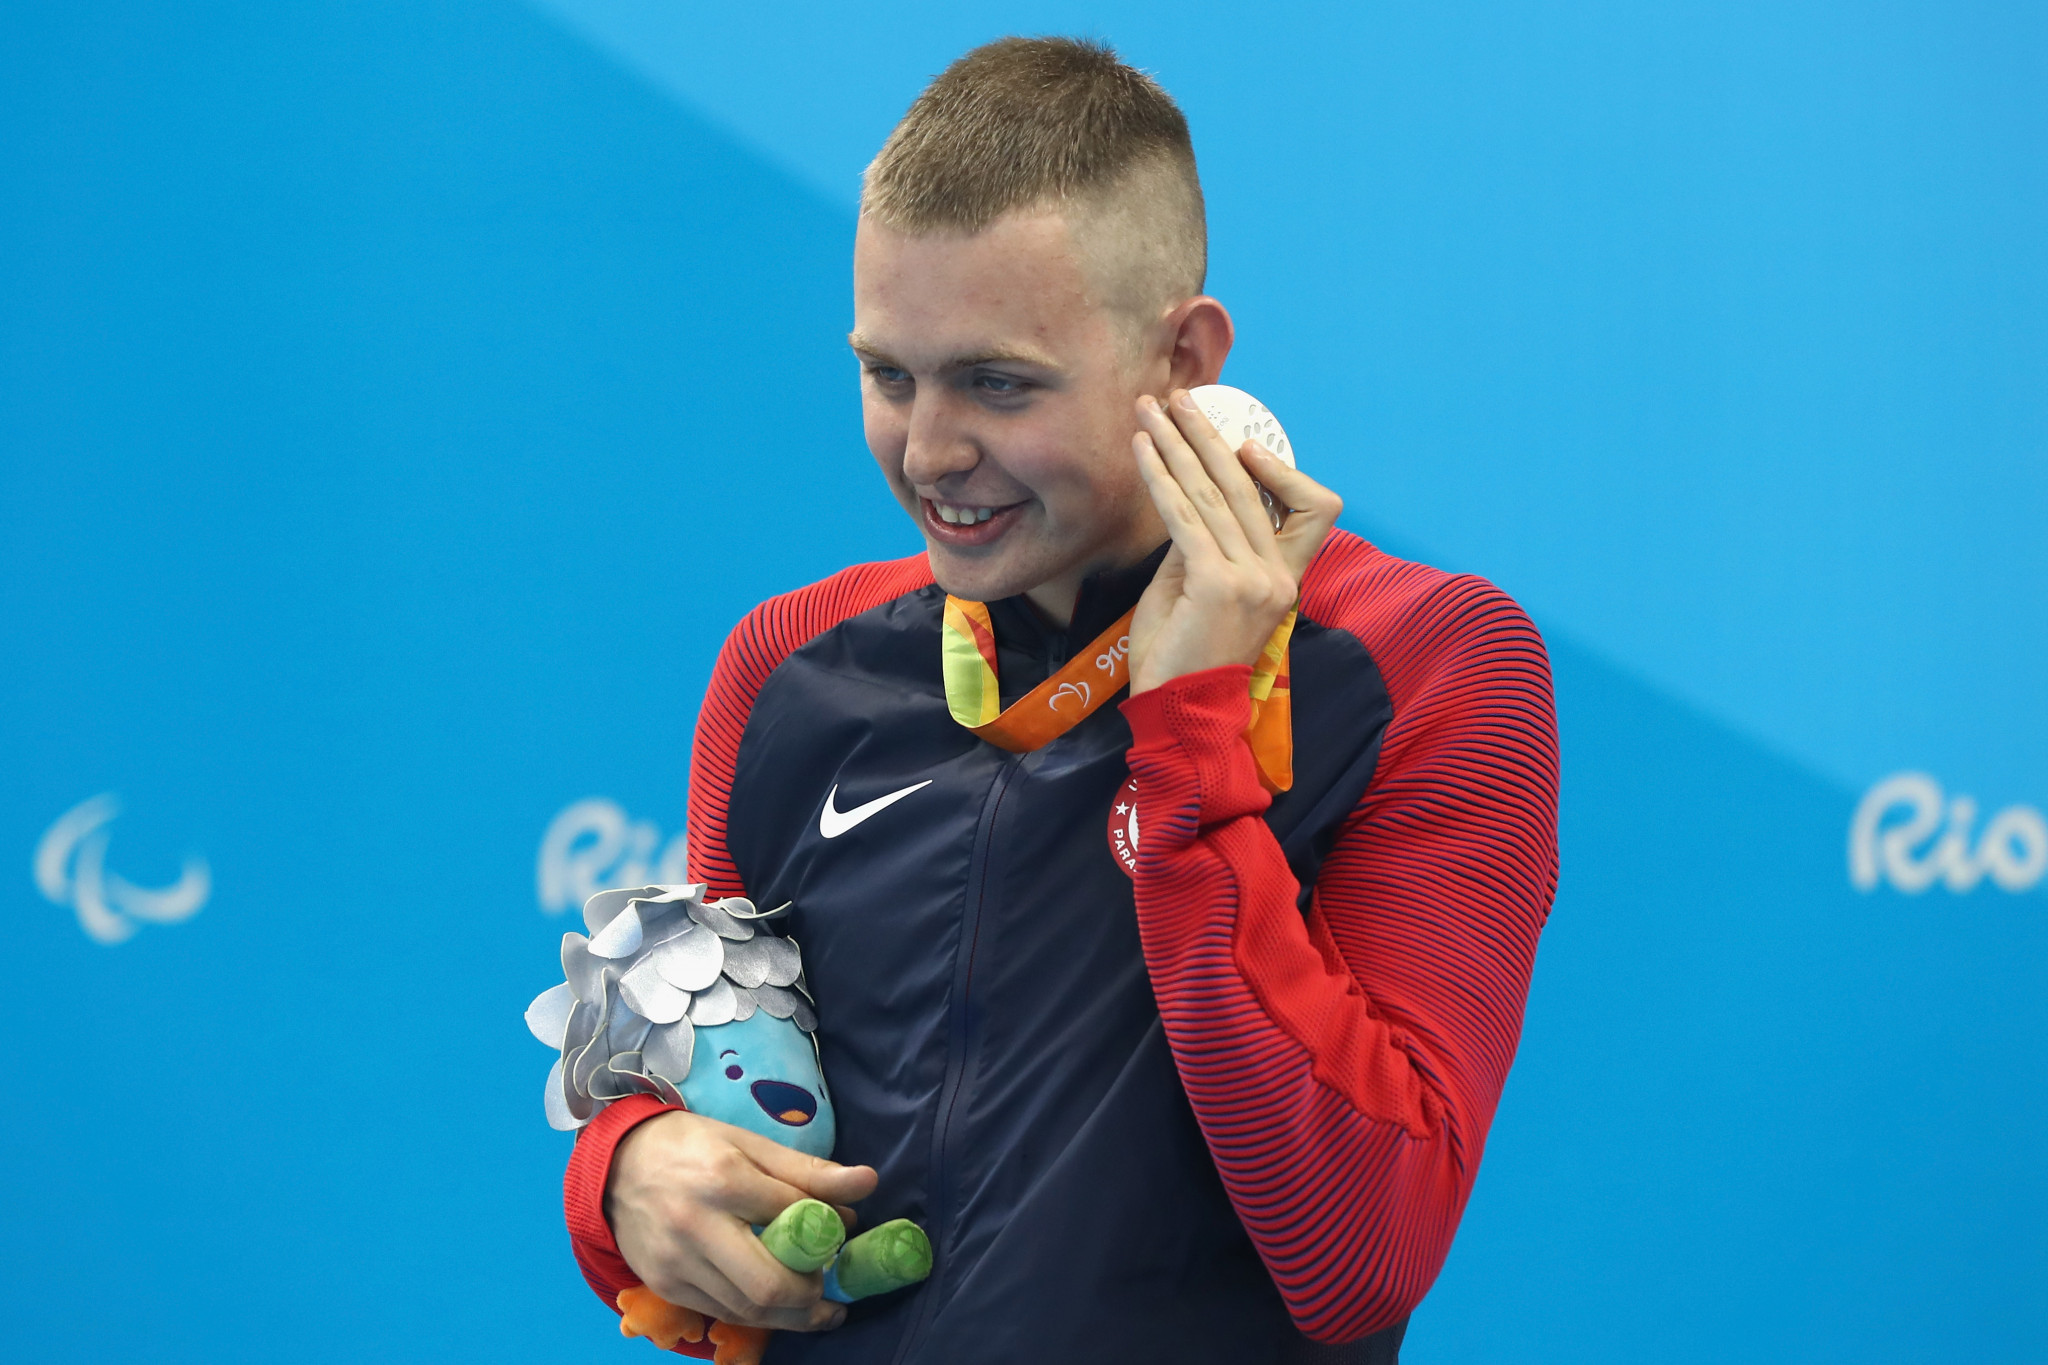 United States para swimmer Thoran Drake won two silver medals at Rio 2016 ©Getty Images